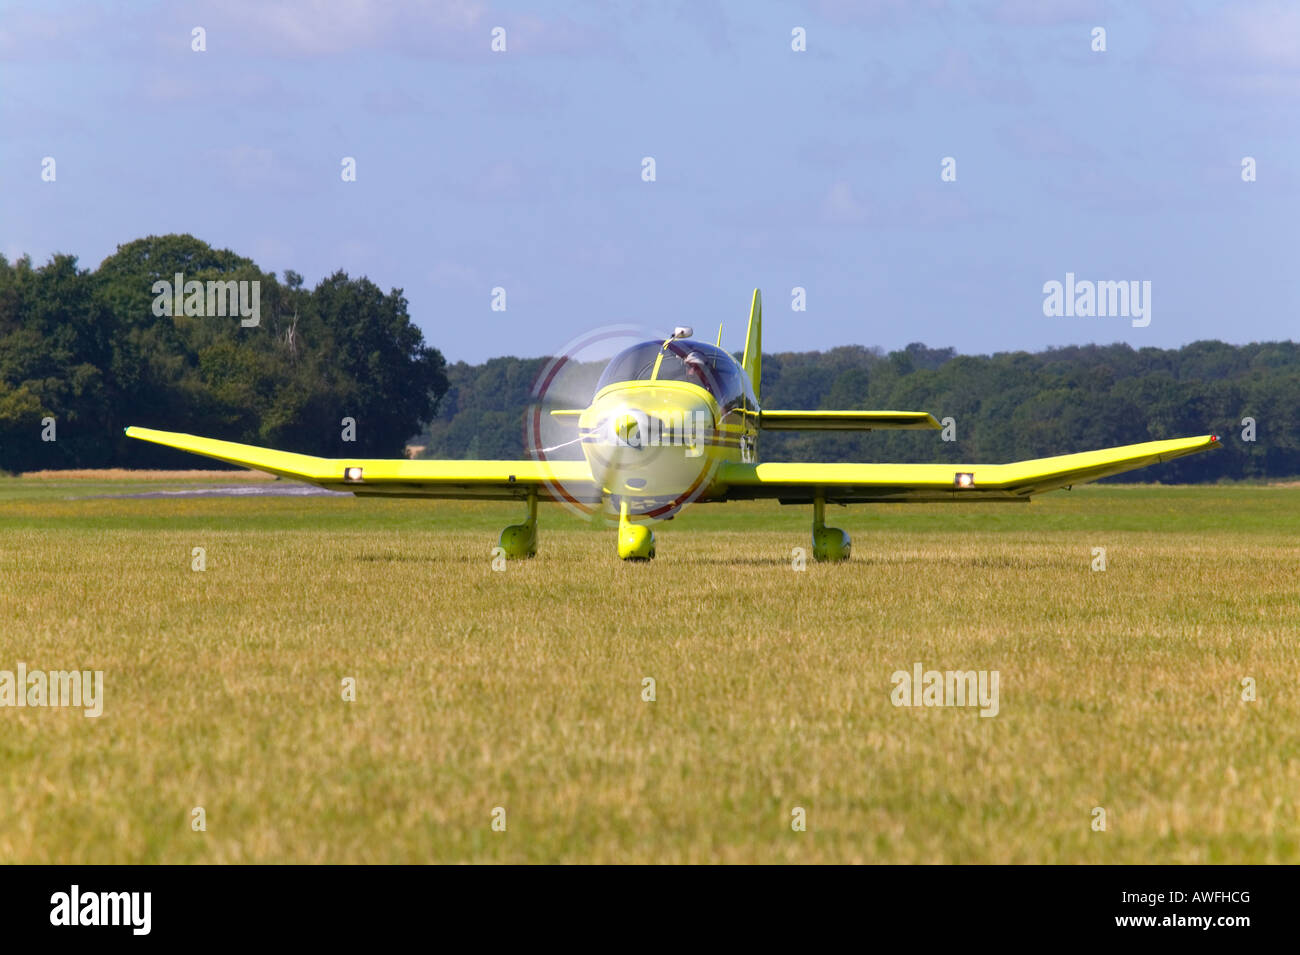 A yellow single propeller light aircraft taxiing to take off from Lasham airfield in Hampshire England Stock Photo